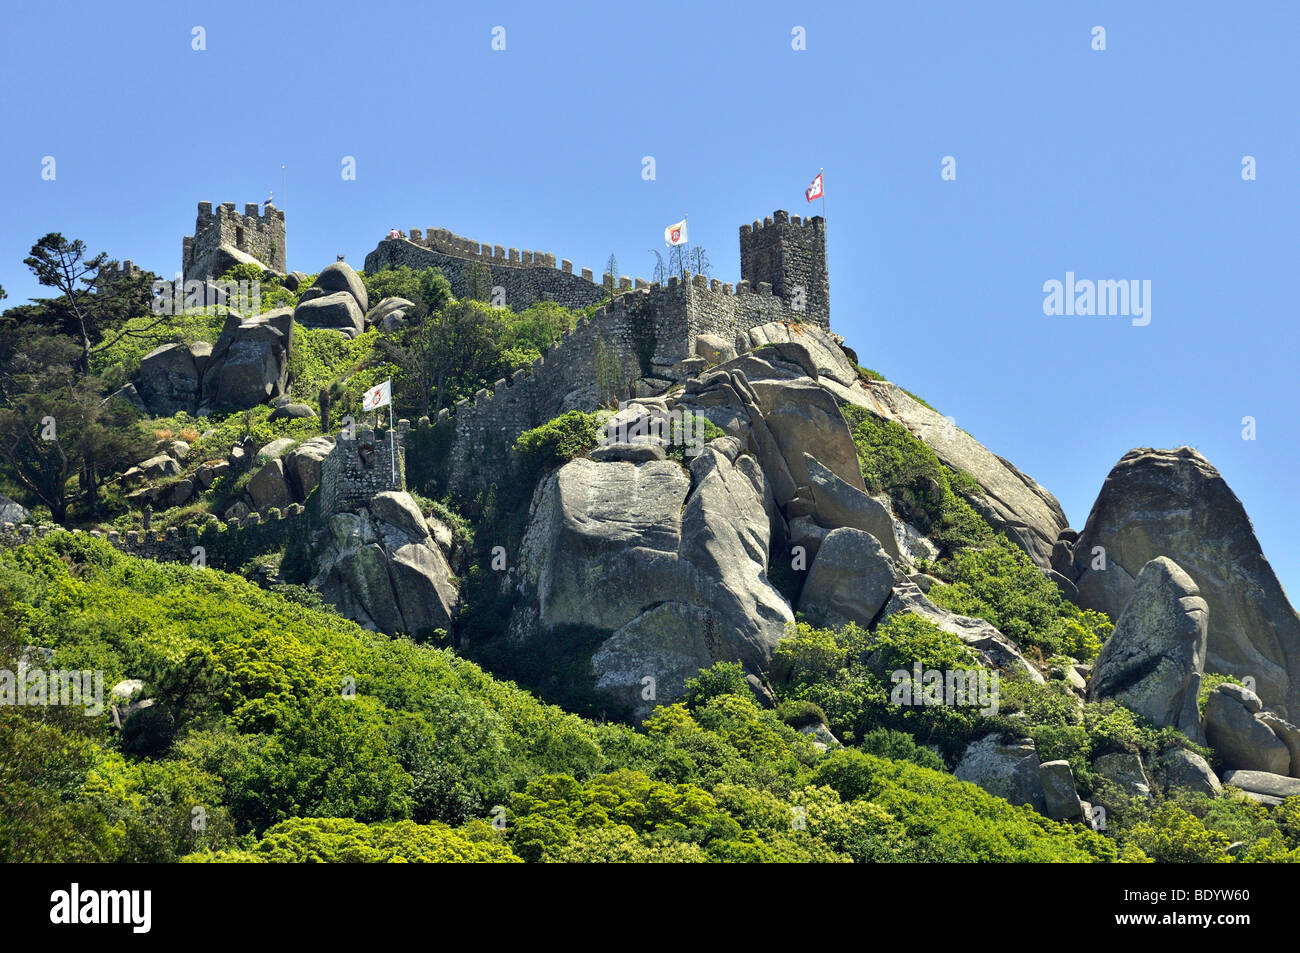 Castle ruin Castelo dos Mouros in Sintra near Lisbon, part of the 'Cultural Landscape of Sintra', UNESCO World Heritage Site, P Stock Photo